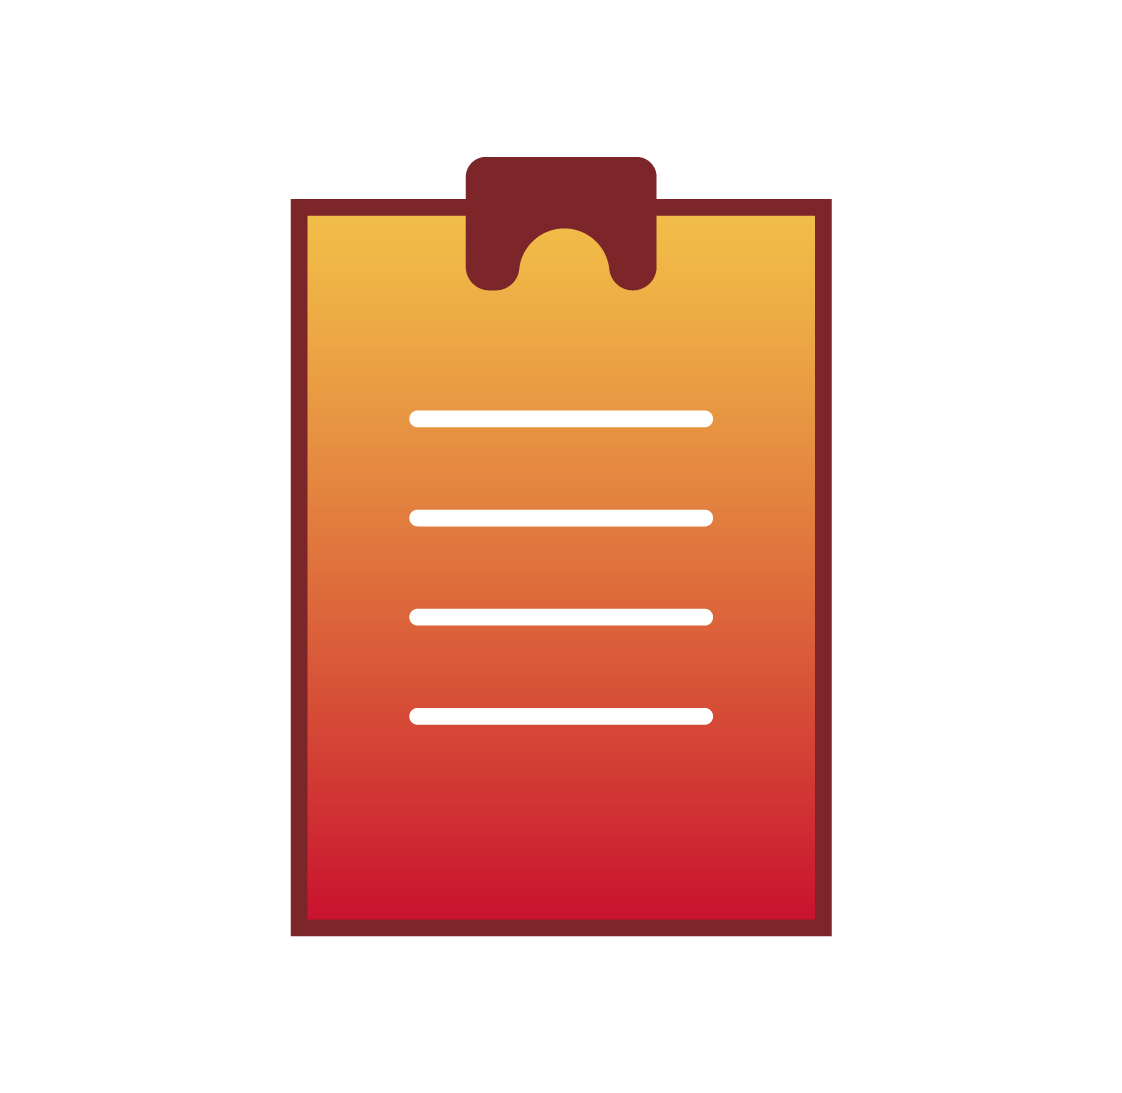 Illustrated icon of document on a clipboard